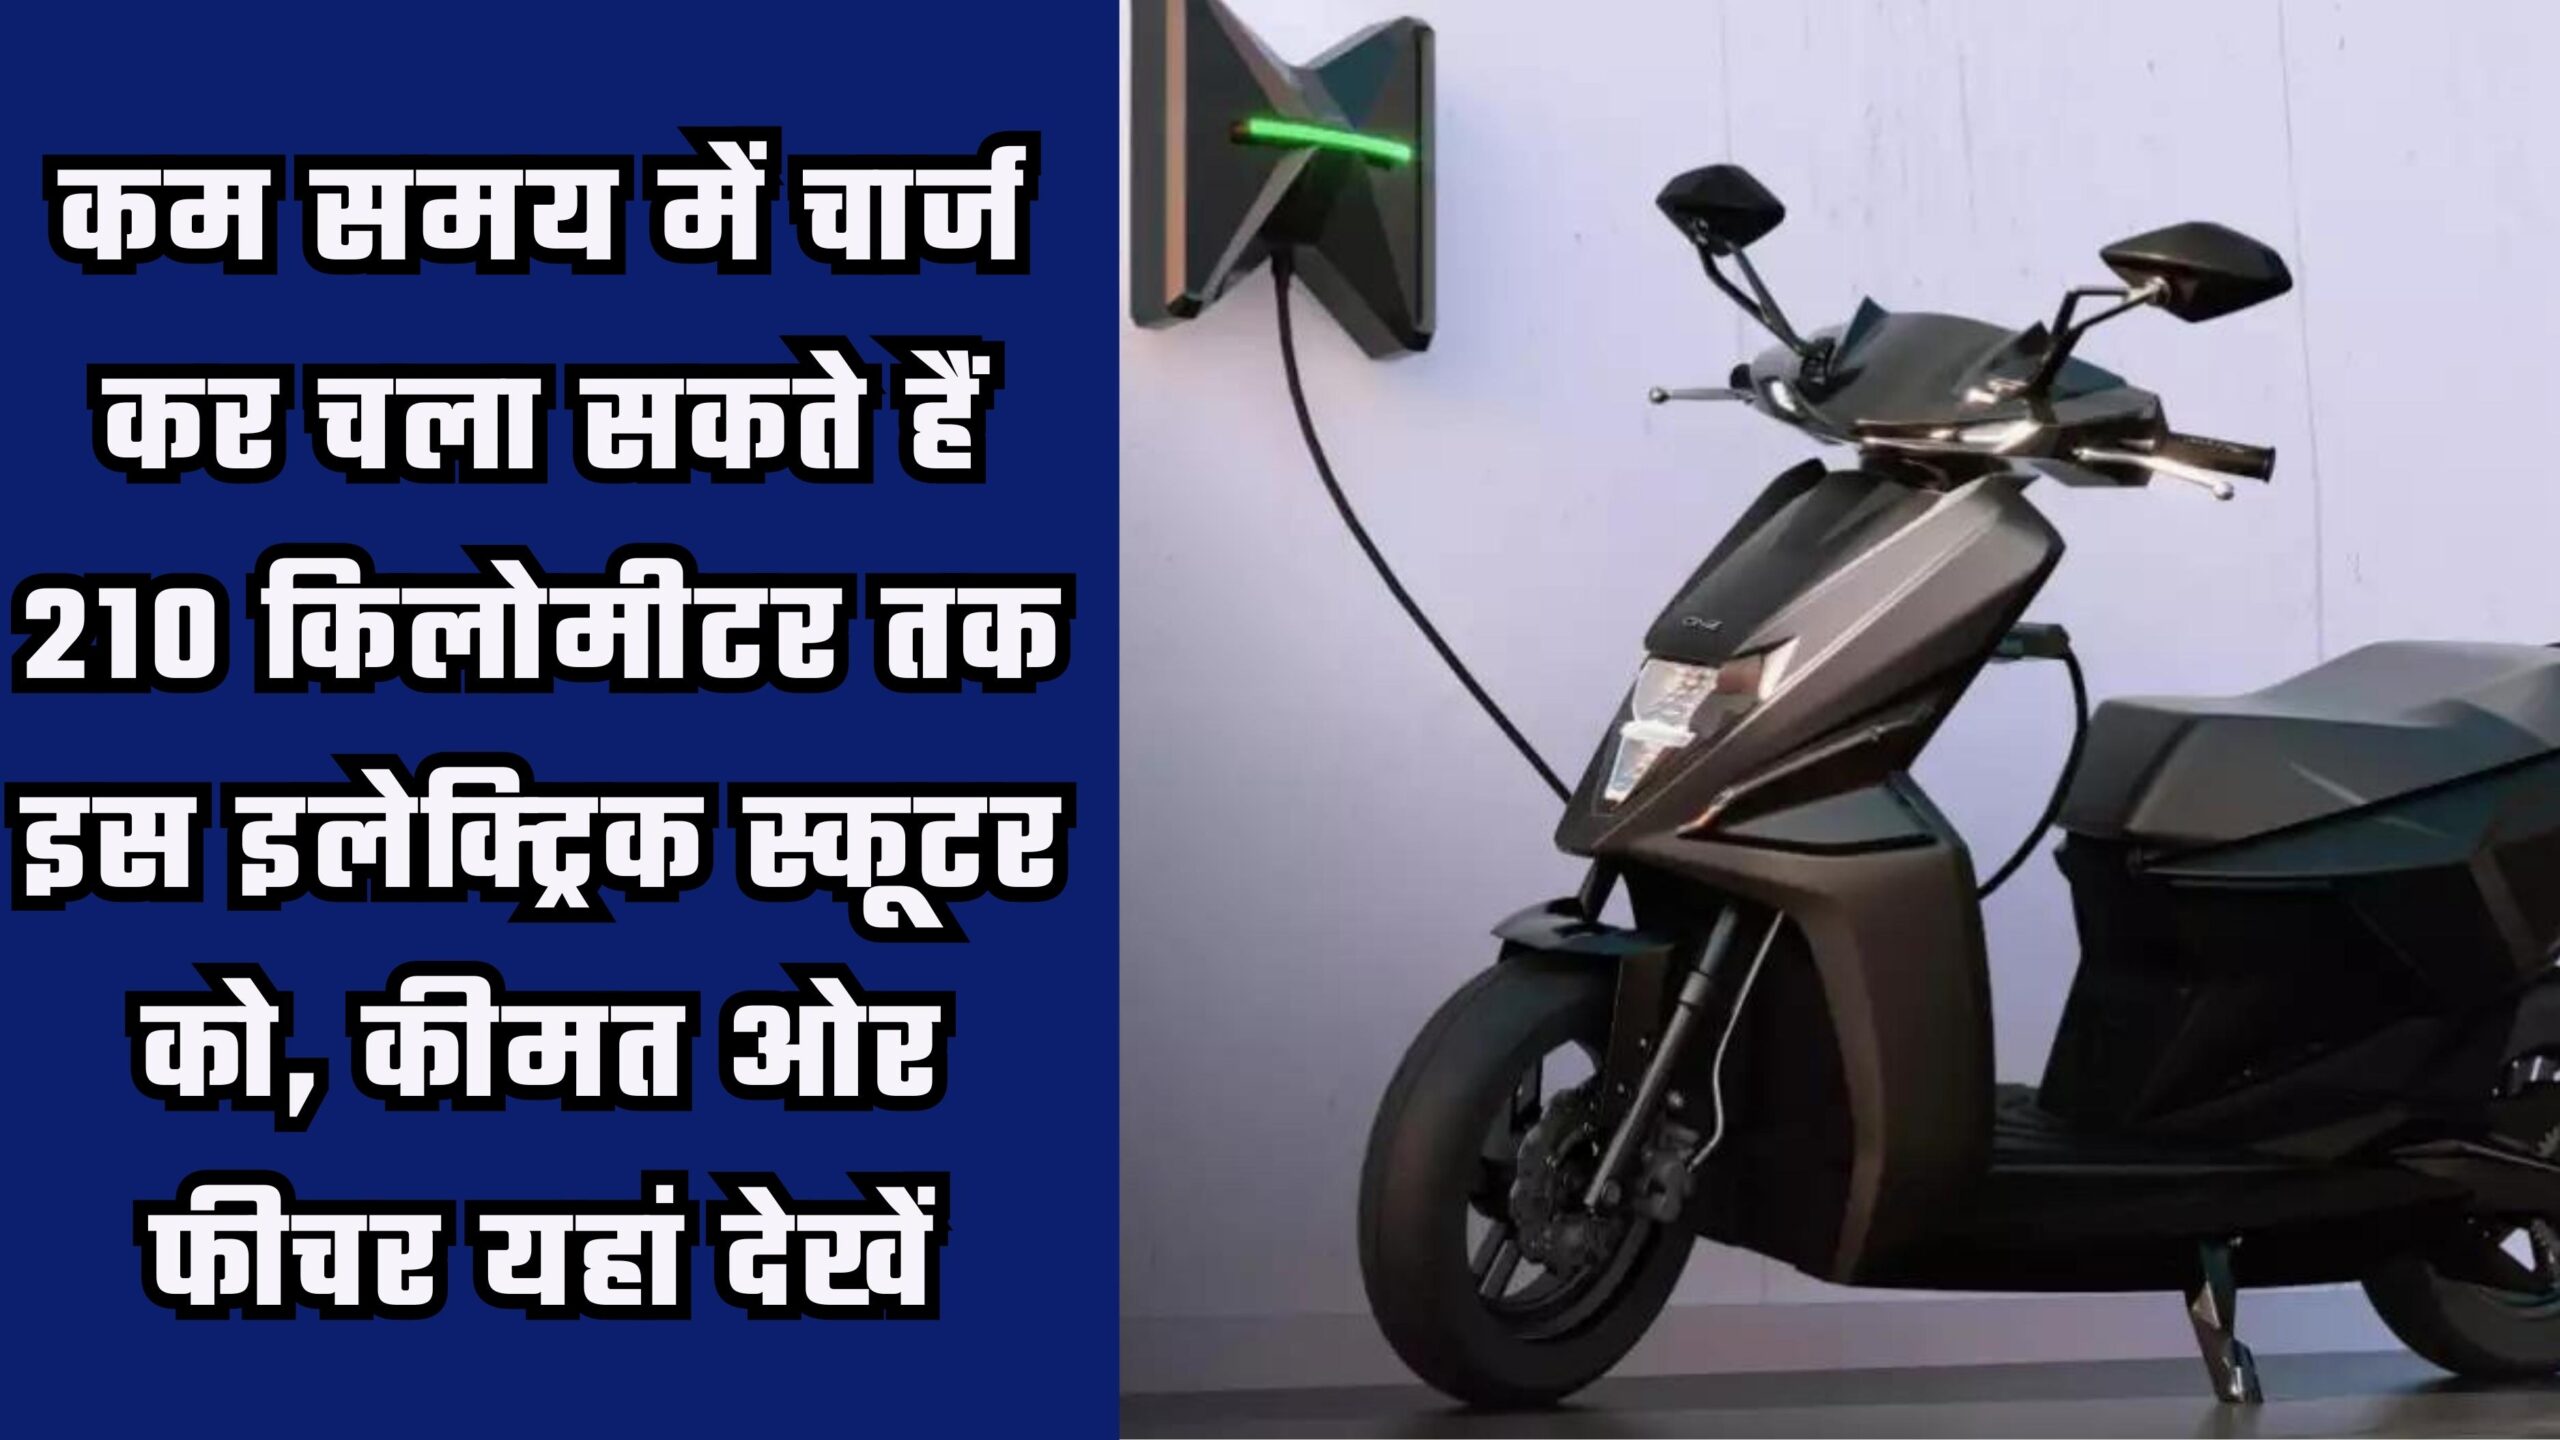 Simple one electric scooter can run up to 210 kilometers by charging in a short time